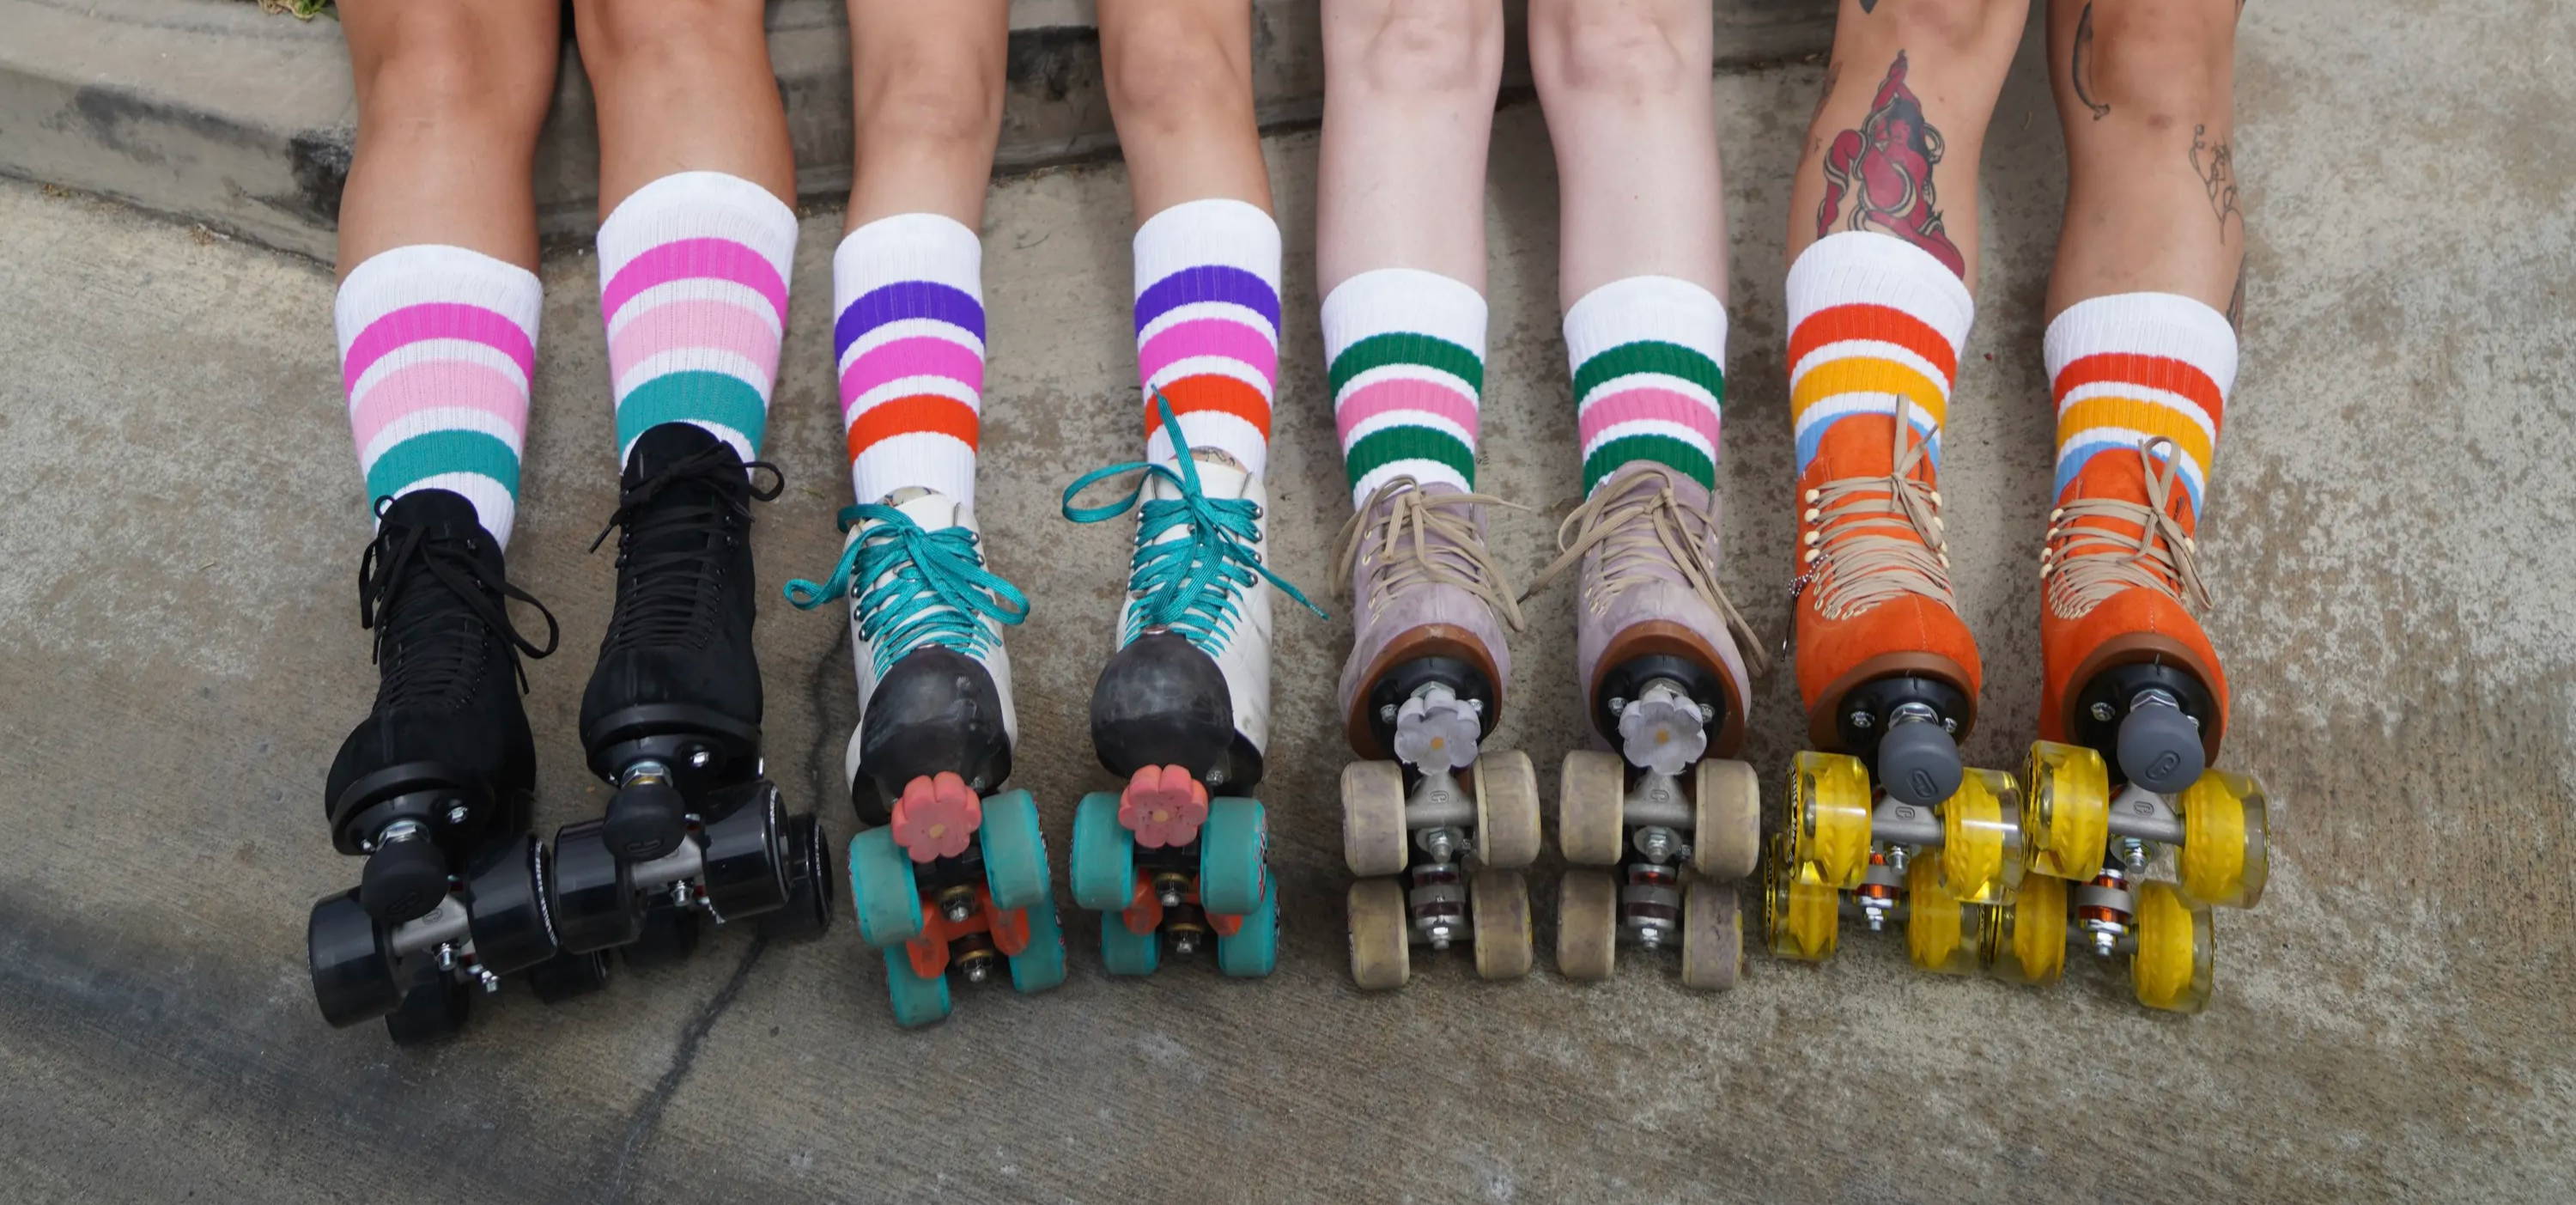 A group of four people from the knees down wearing moxi roller skates of different kinds and colors